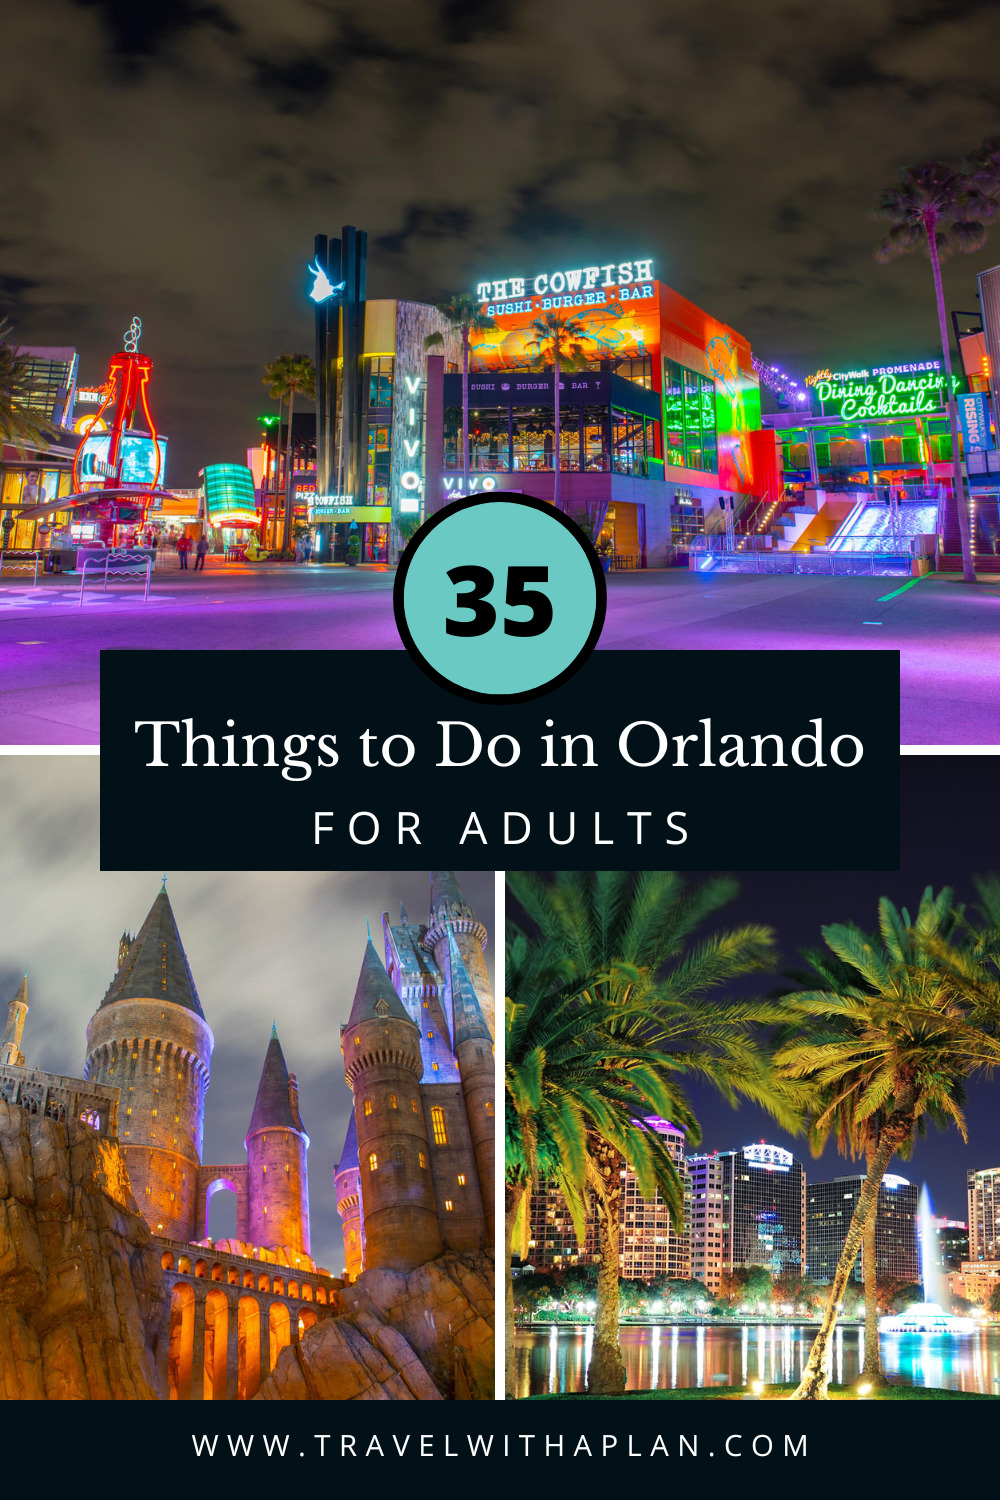 Here's our epic list of fun things to do in Orlando for adults!  These adult attractions are the best of the best and include the most fun and unique things to do in Orlando!  #Orlandoattractions #Floridatravel